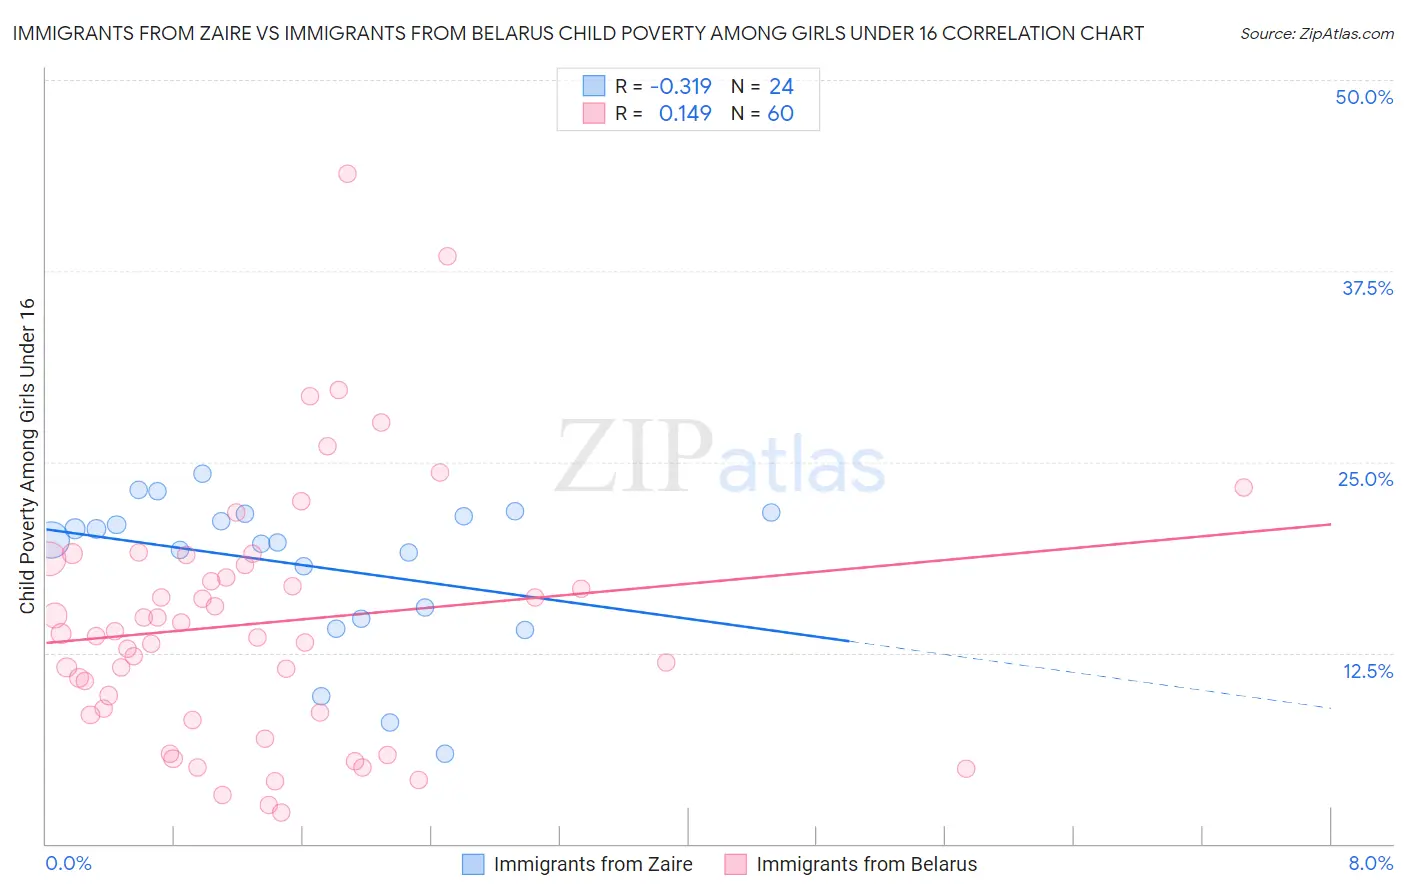 Immigrants from Zaire vs Immigrants from Belarus Child Poverty Among Girls Under 16